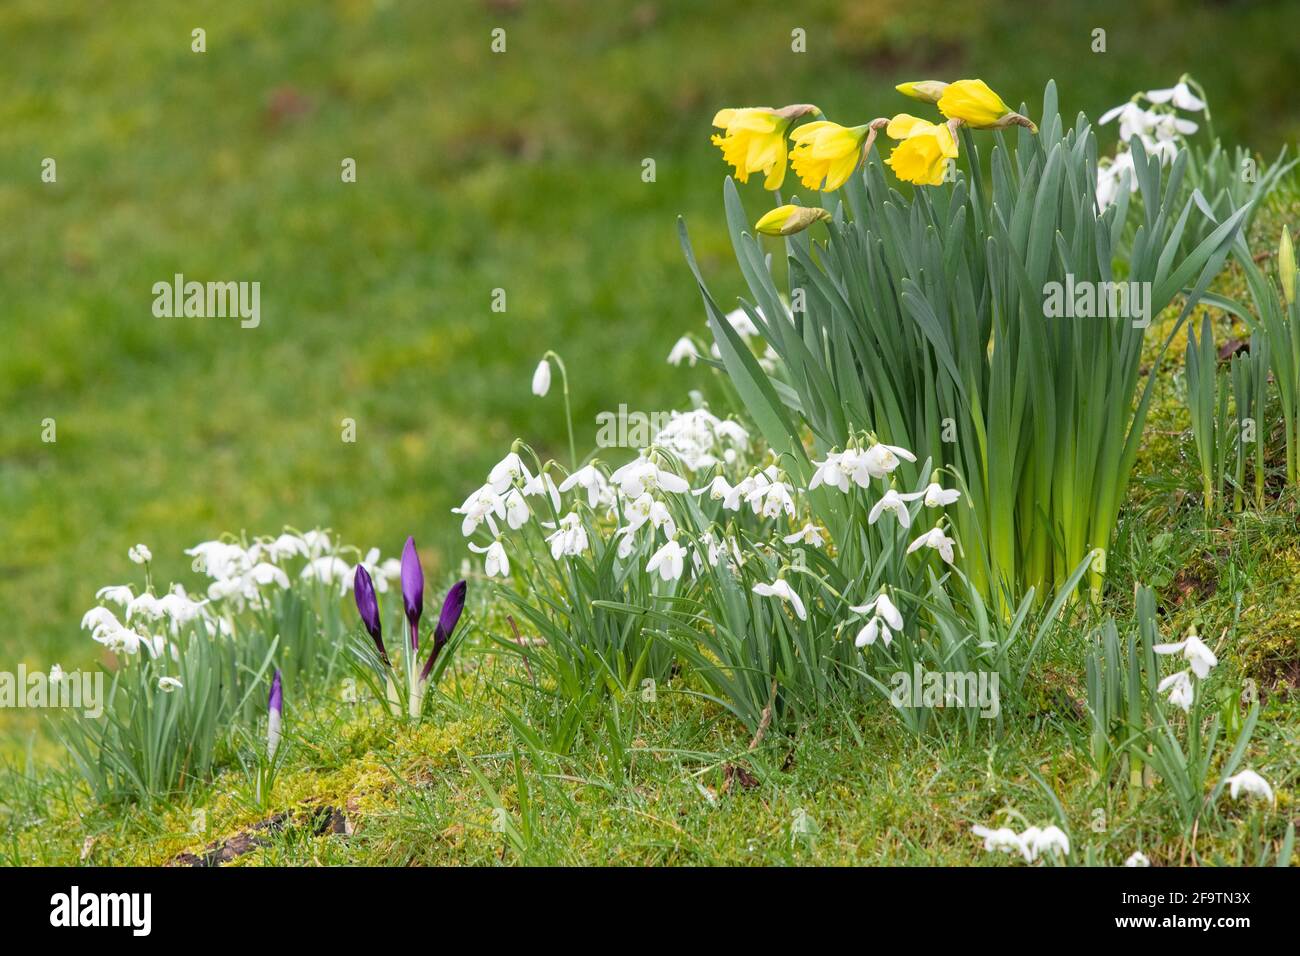 Spring flowers in uk garden - daffodils, snowdrops and crocuses Stock Photo